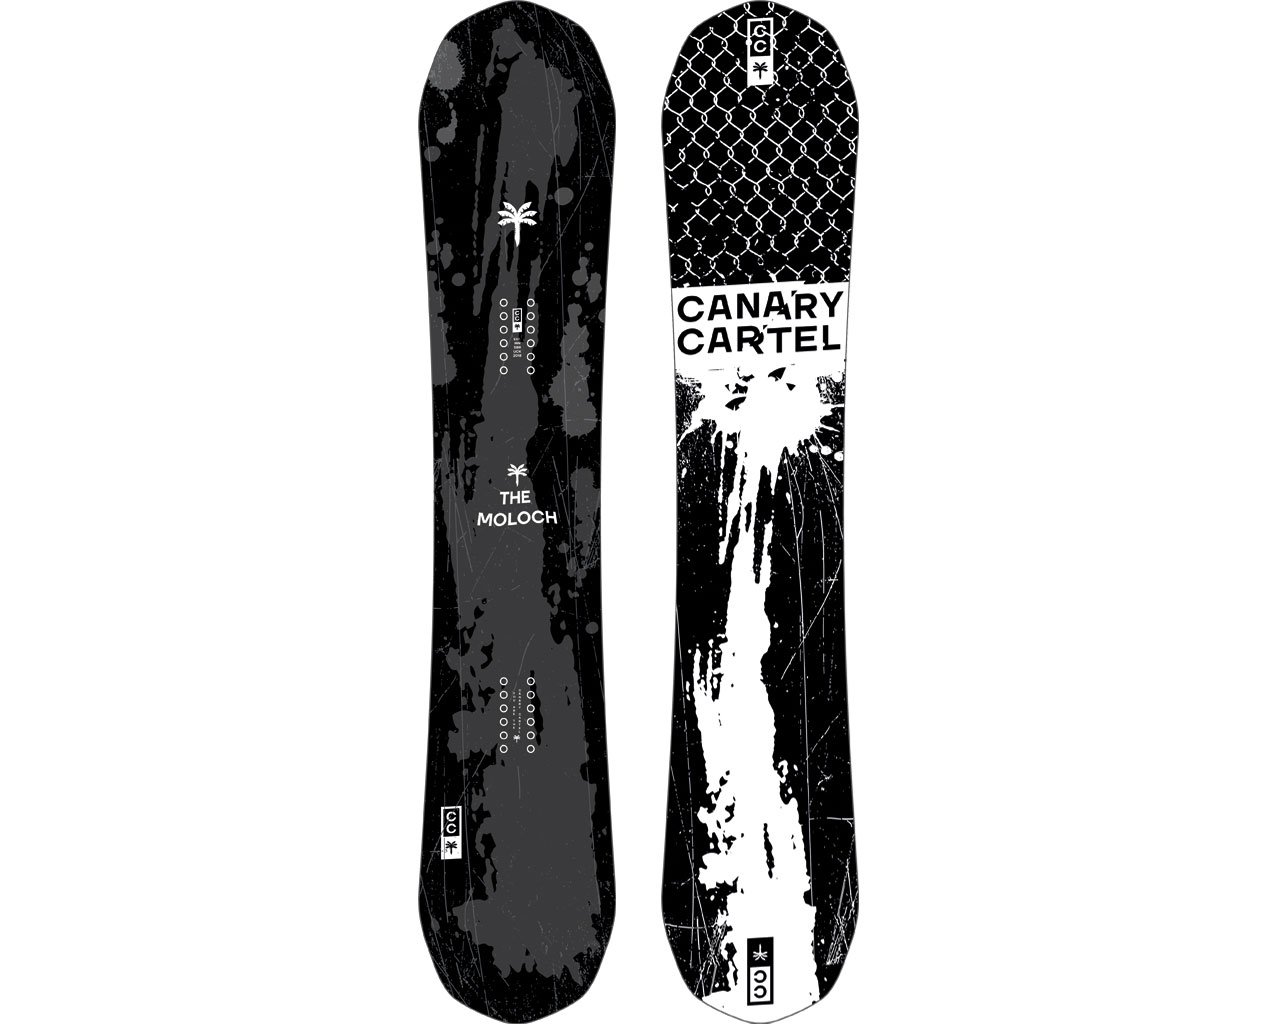 Canary Cartel FW20/21 Snowboard Preview